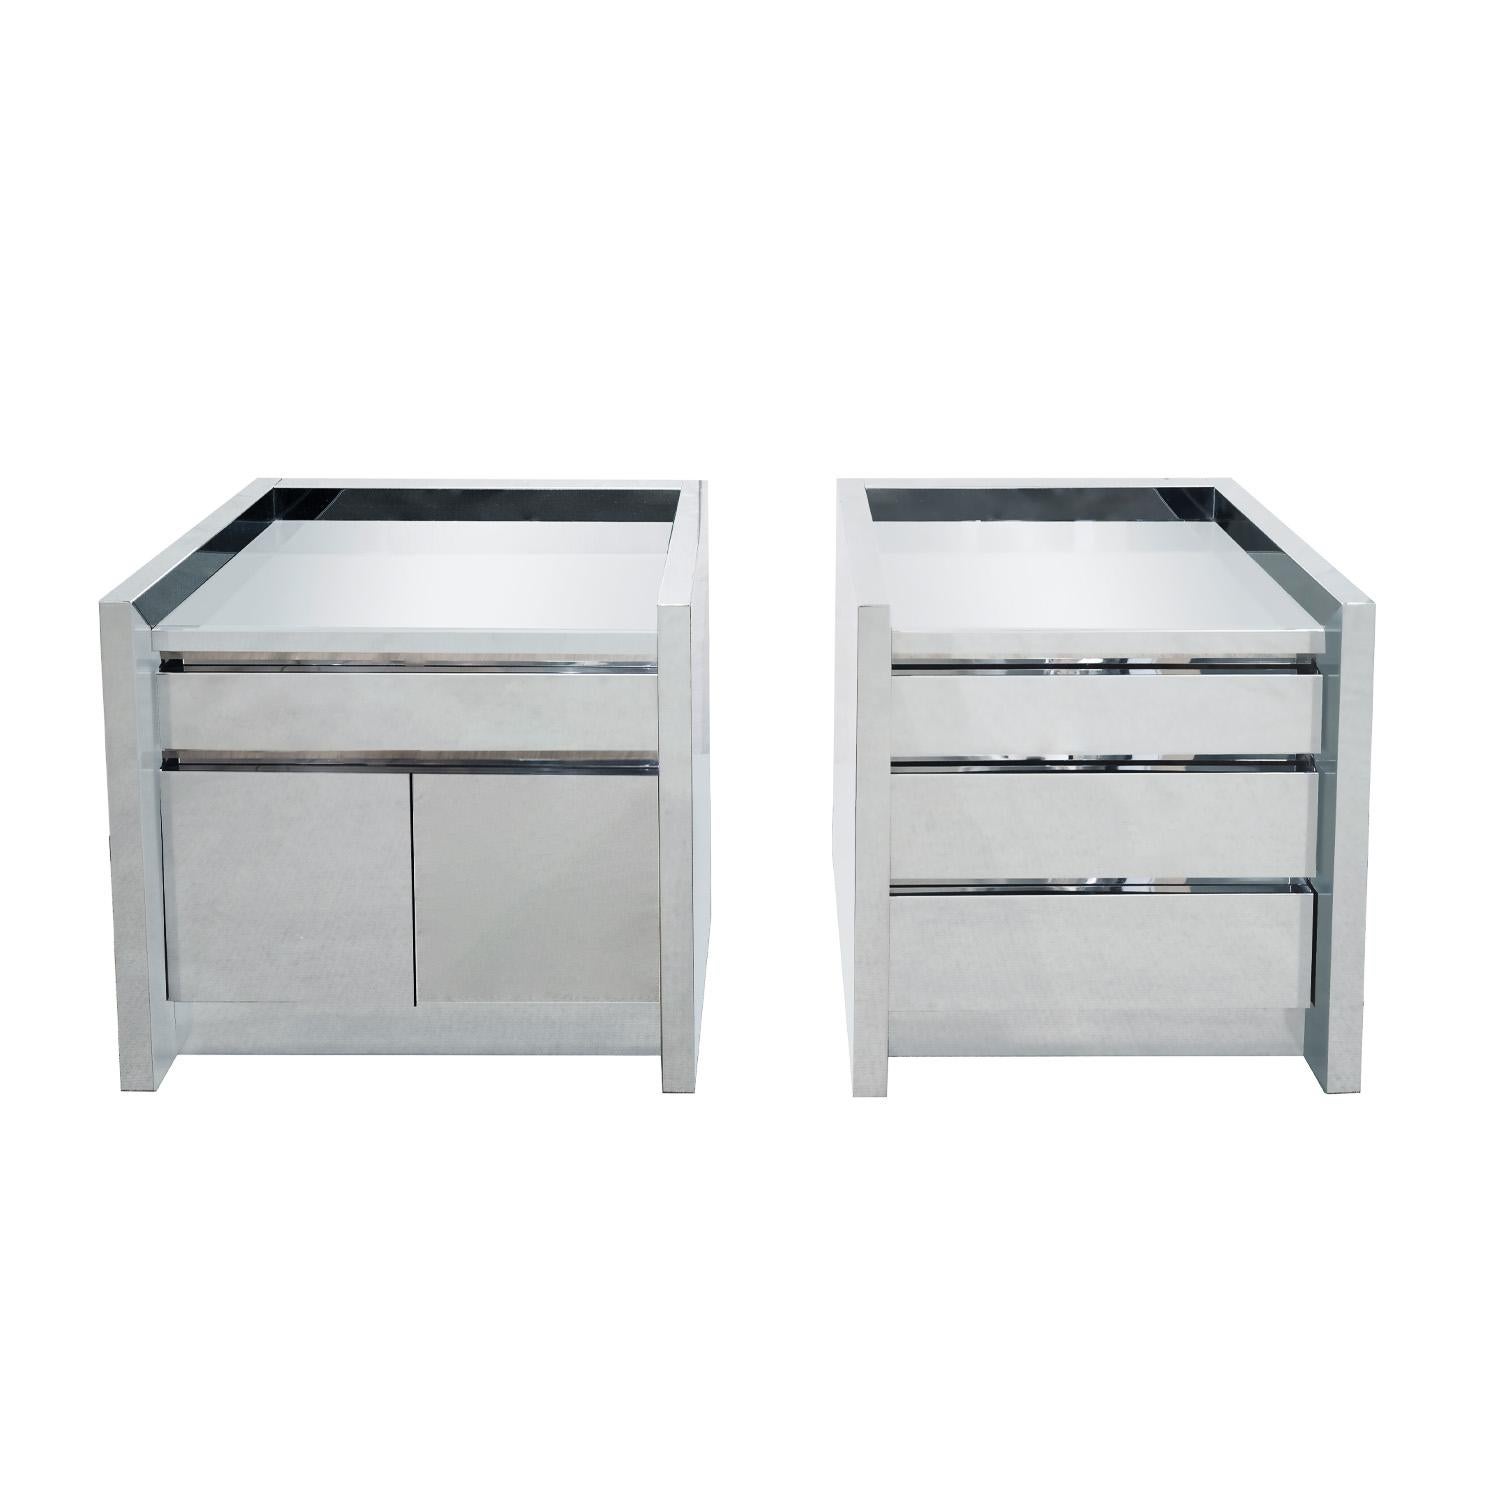 Pair of rare and exceptional bedside tables in polished stainless steel with glass mirror tops, one with 1 drawer above 2 doors and one with 3 drawers by Karl Springer American 1980s. This series in stainless steel is among Springer’s finest.